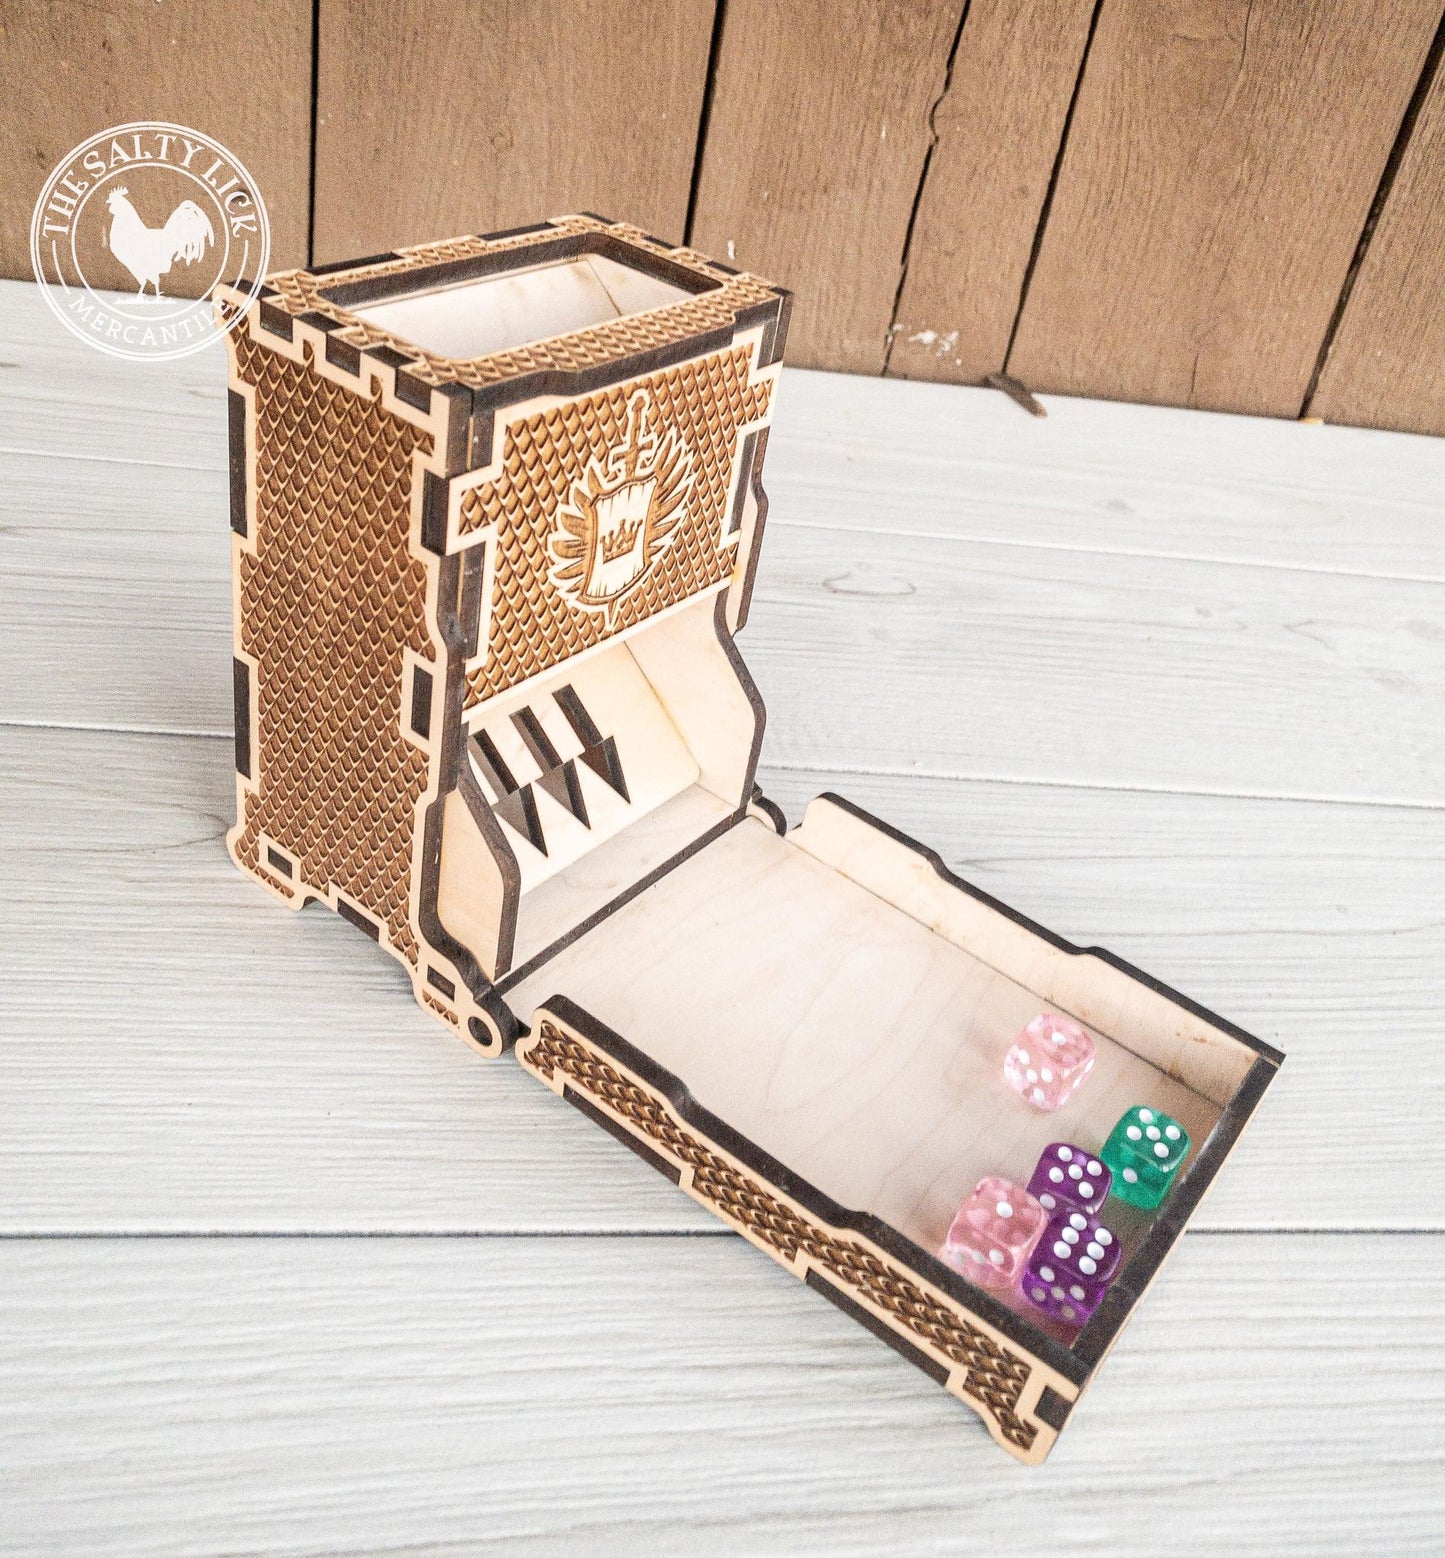 Folding Dice Tower - DND Dungeons and Dragons